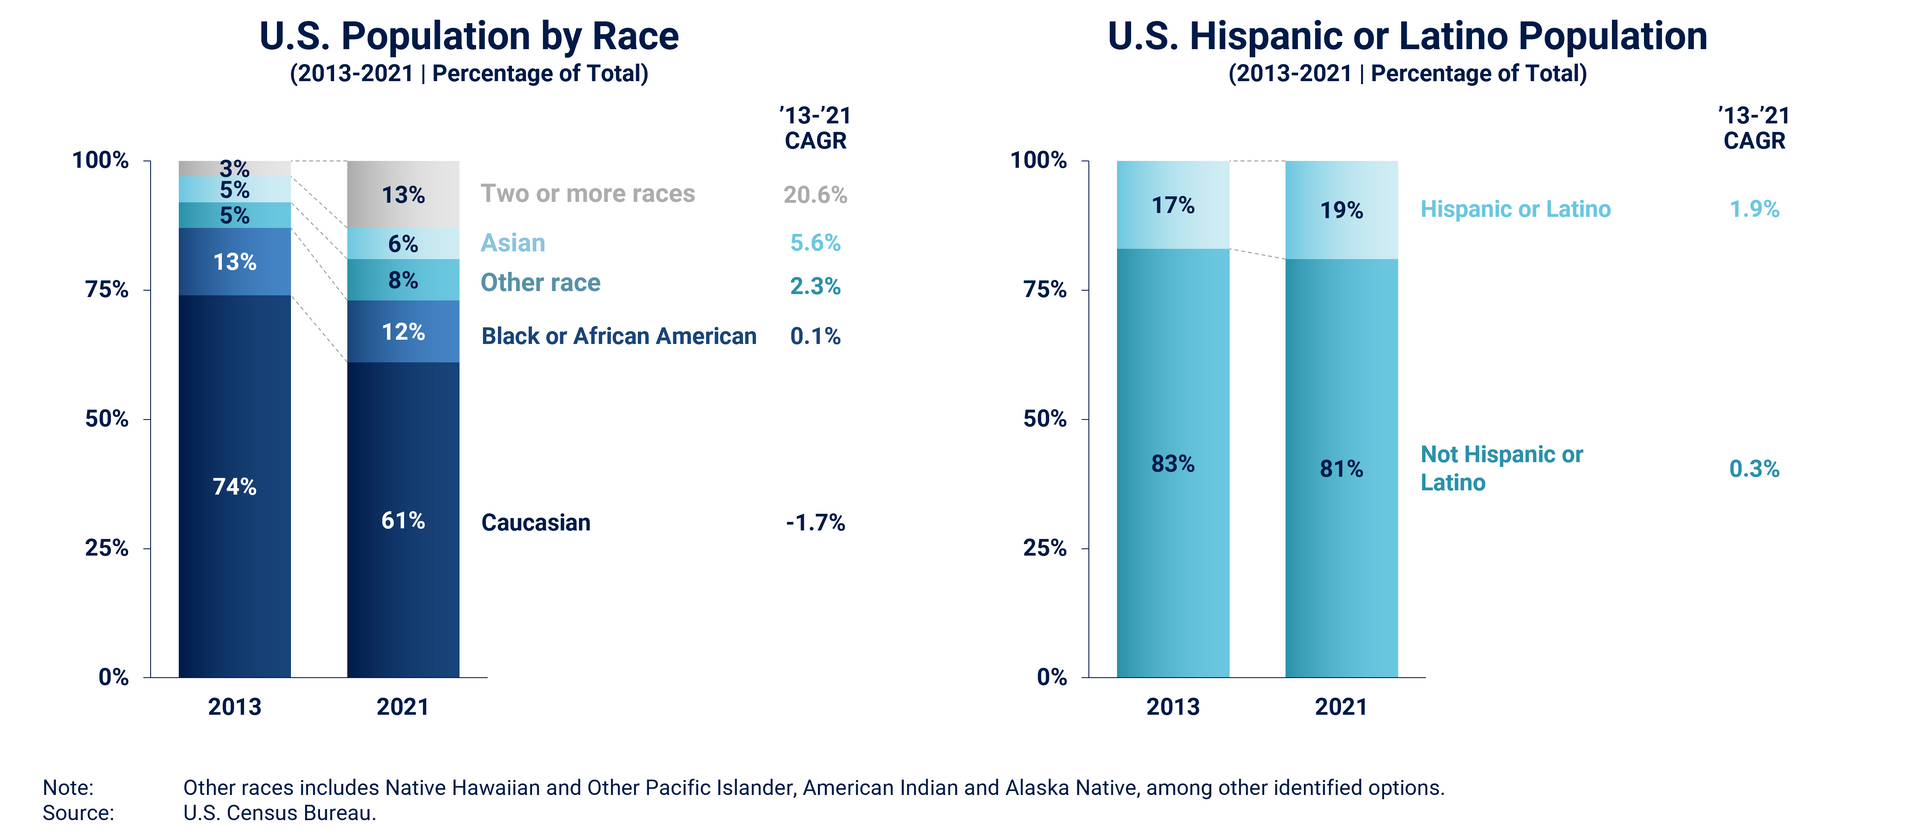 Two graphs showing data of both U.S. population by race and the U.S. Hispanic or Latino population between 2013-2021.